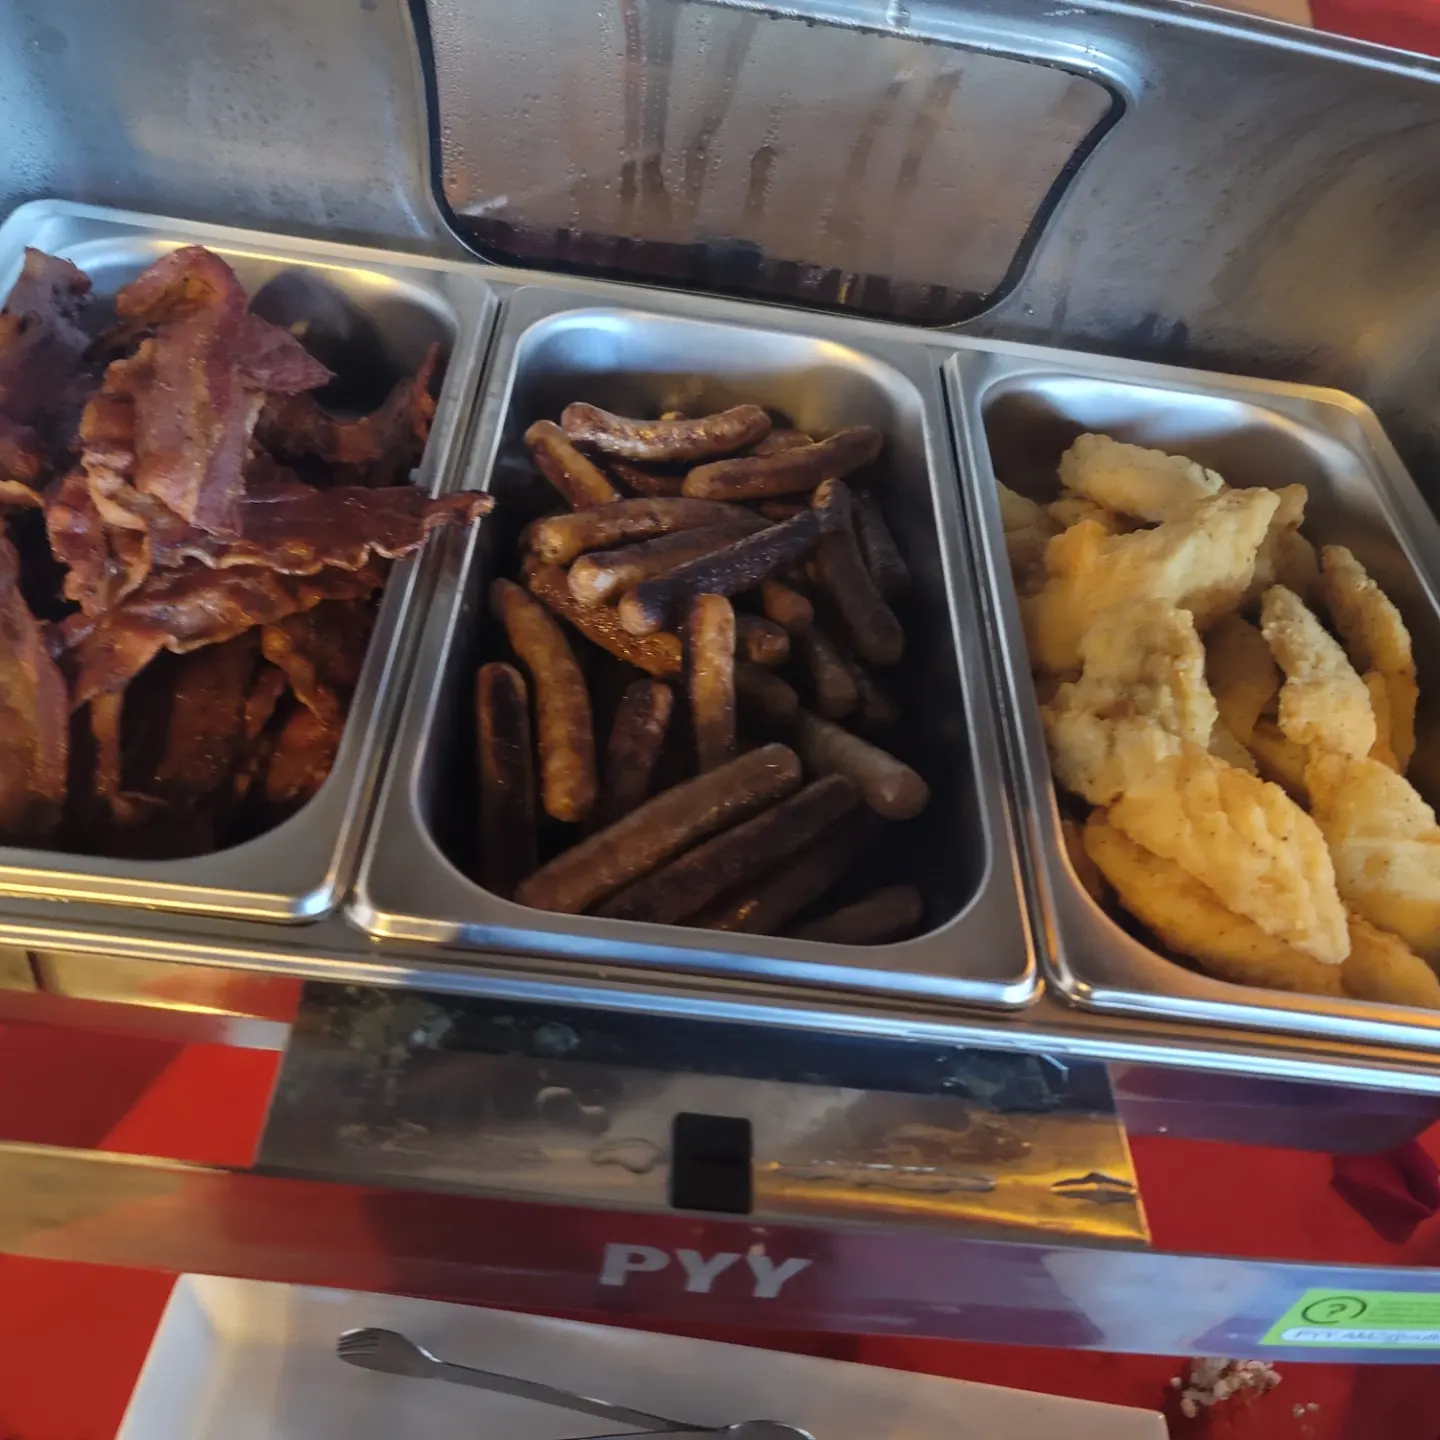 A tray of food is shown with bacon, fries and potatoes.